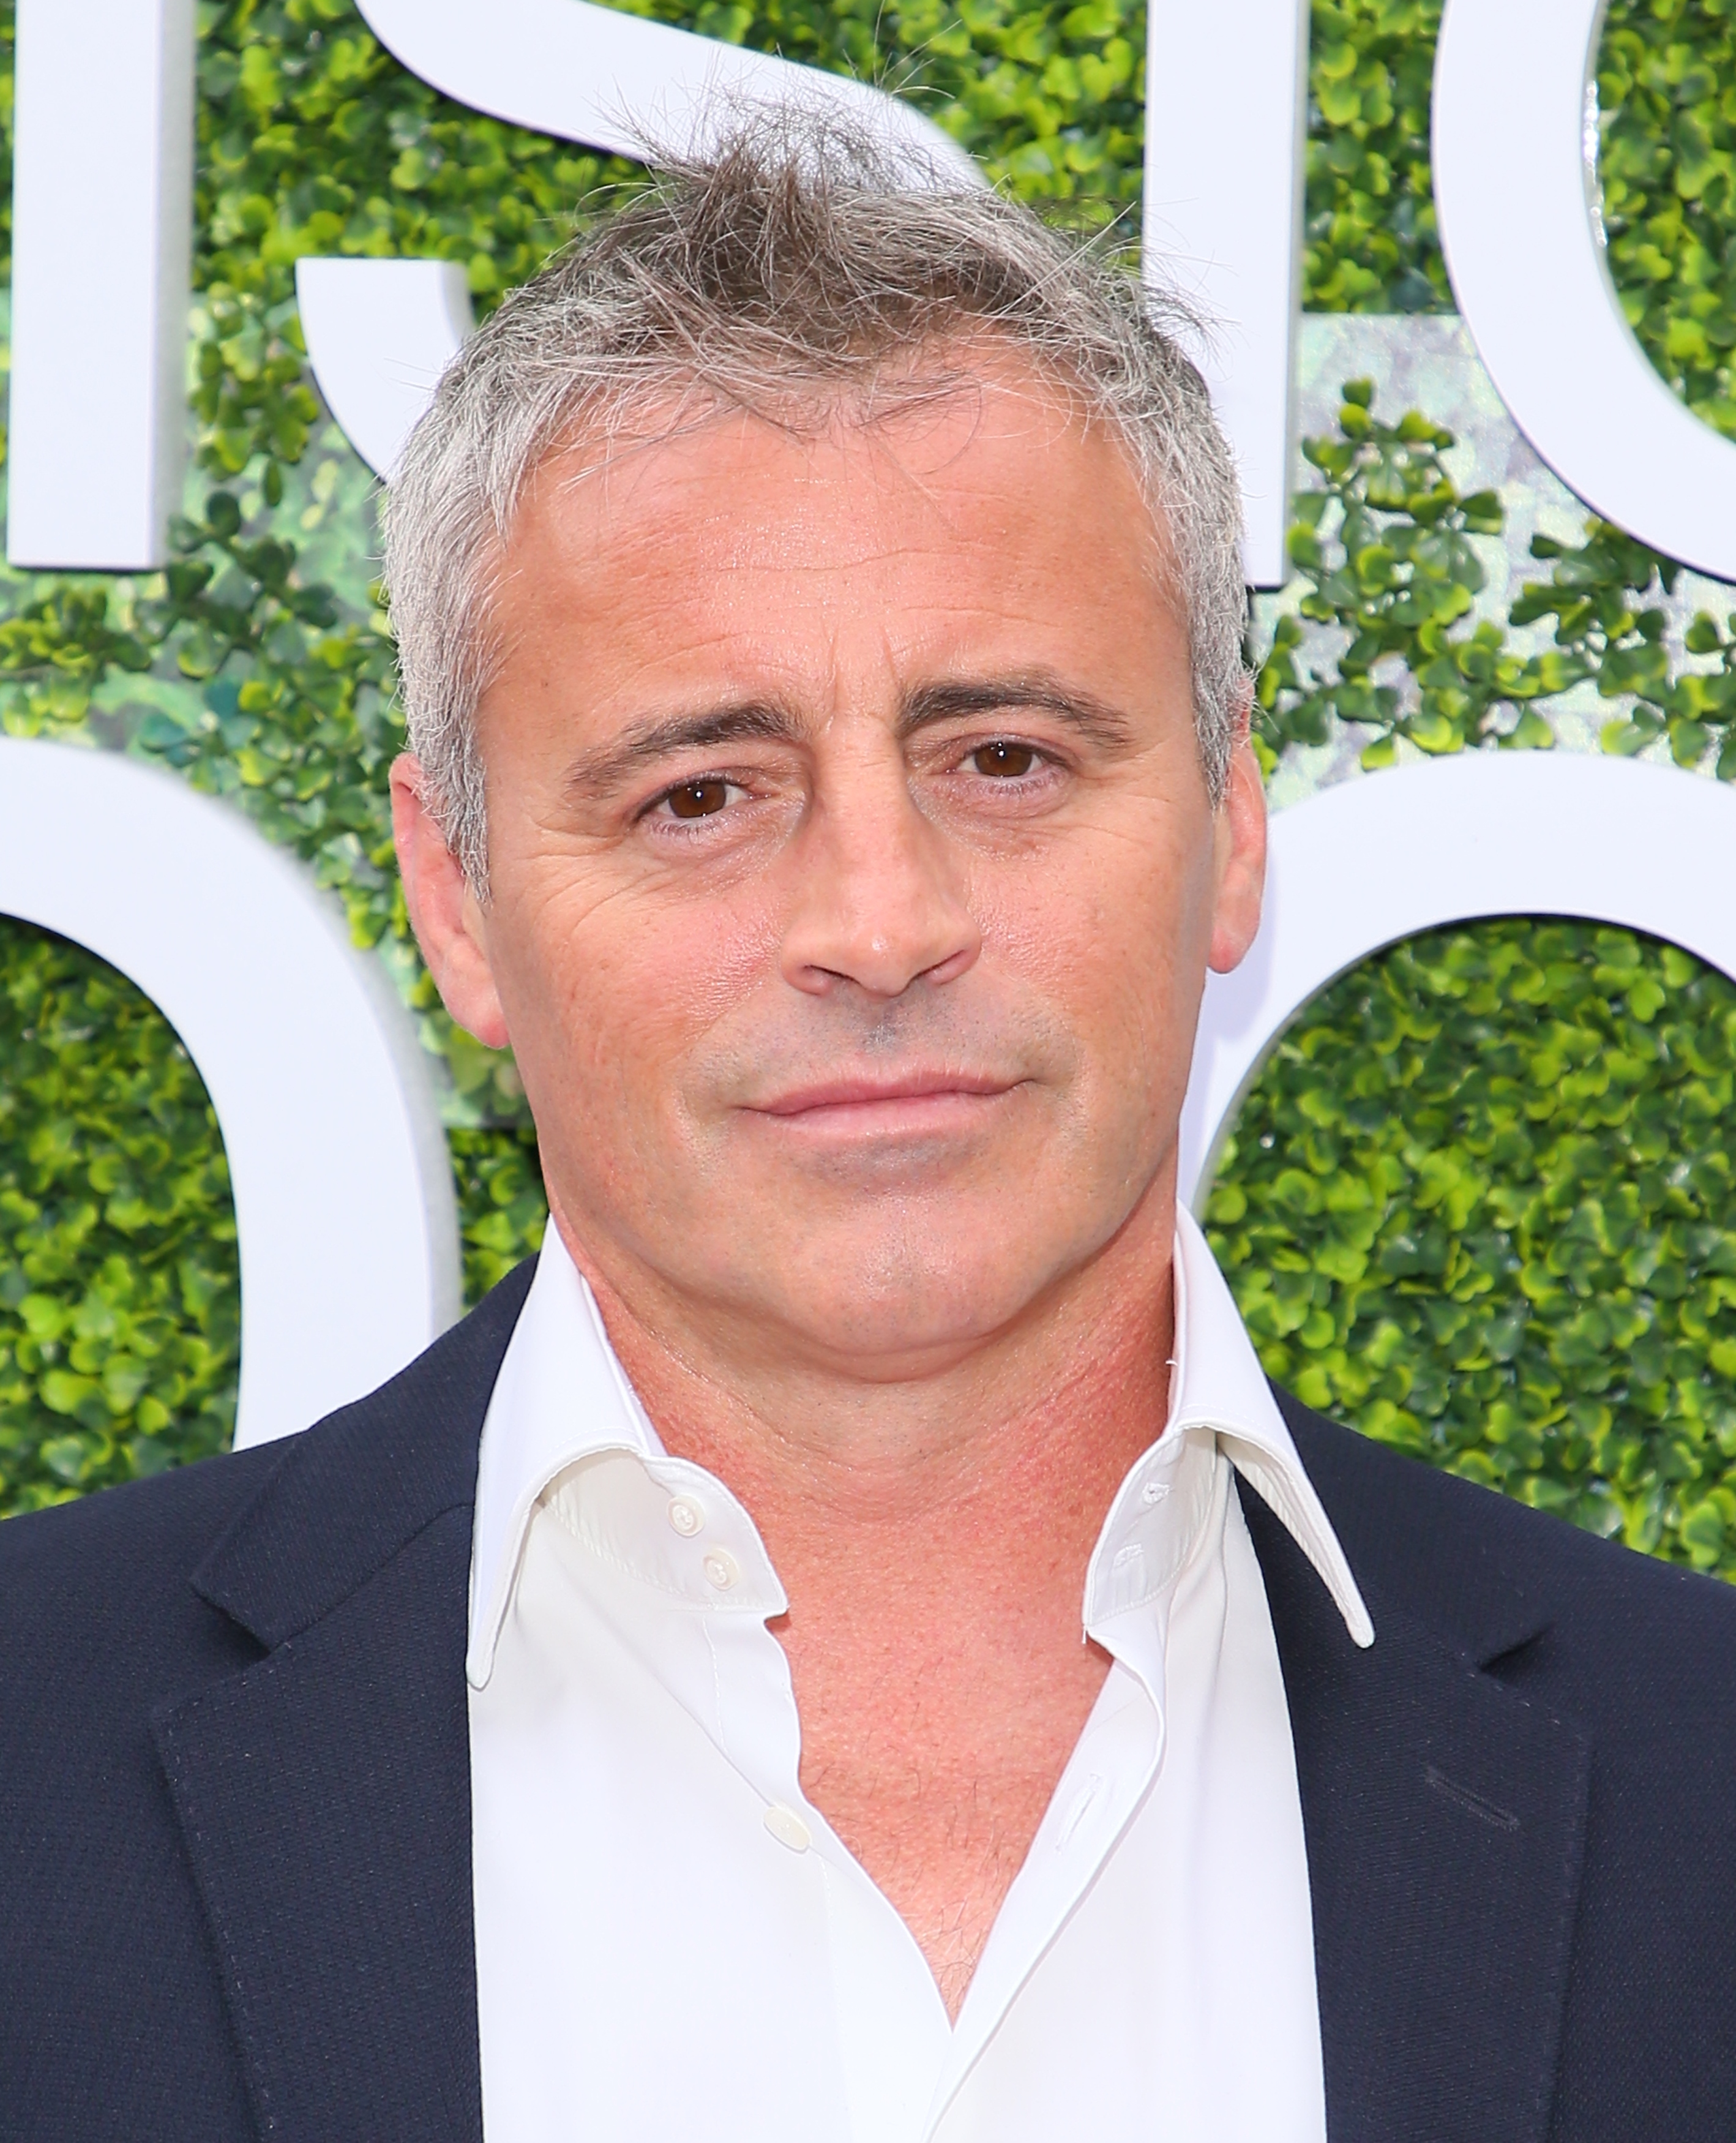 Matt LeBlanc at a Summer TCA Tour event in Studio City, California on August 1, 2017 | Source: Getty Images